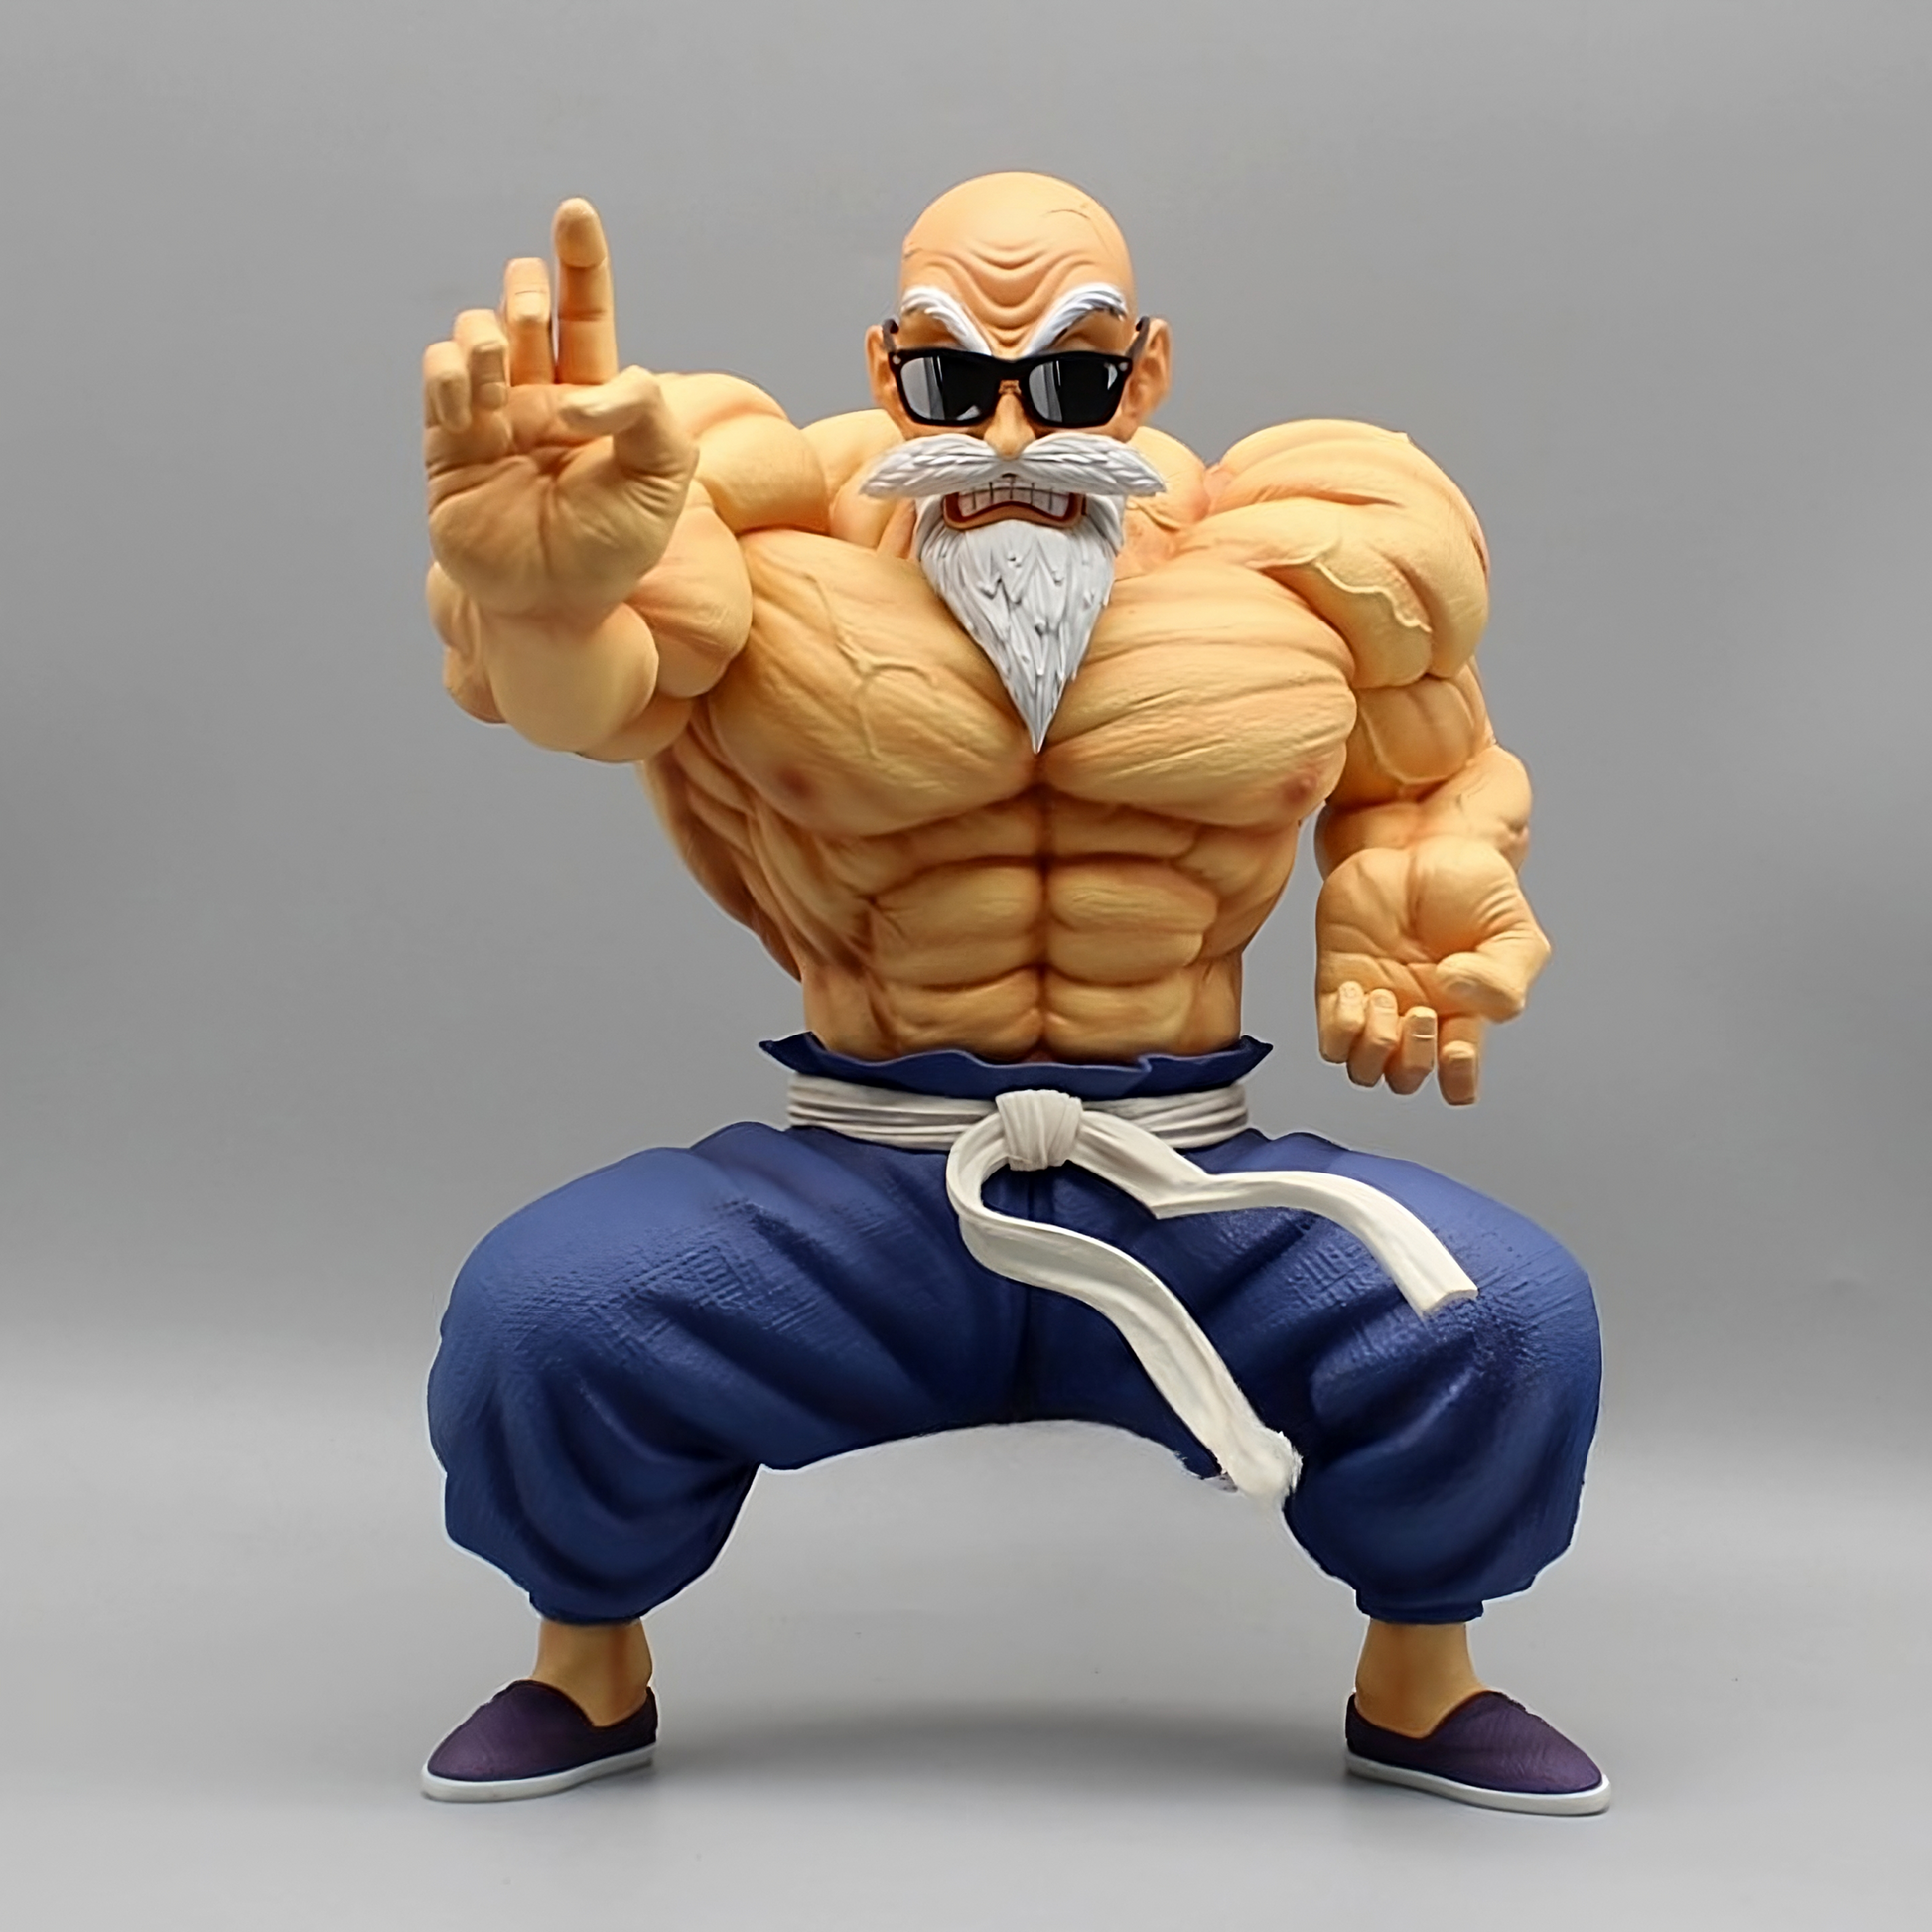 Master Roshi in his muscular form as a Dragon Ball collectible figure, wearing sunglasses, a blue martial arts uniform, and posing with an extended hand.